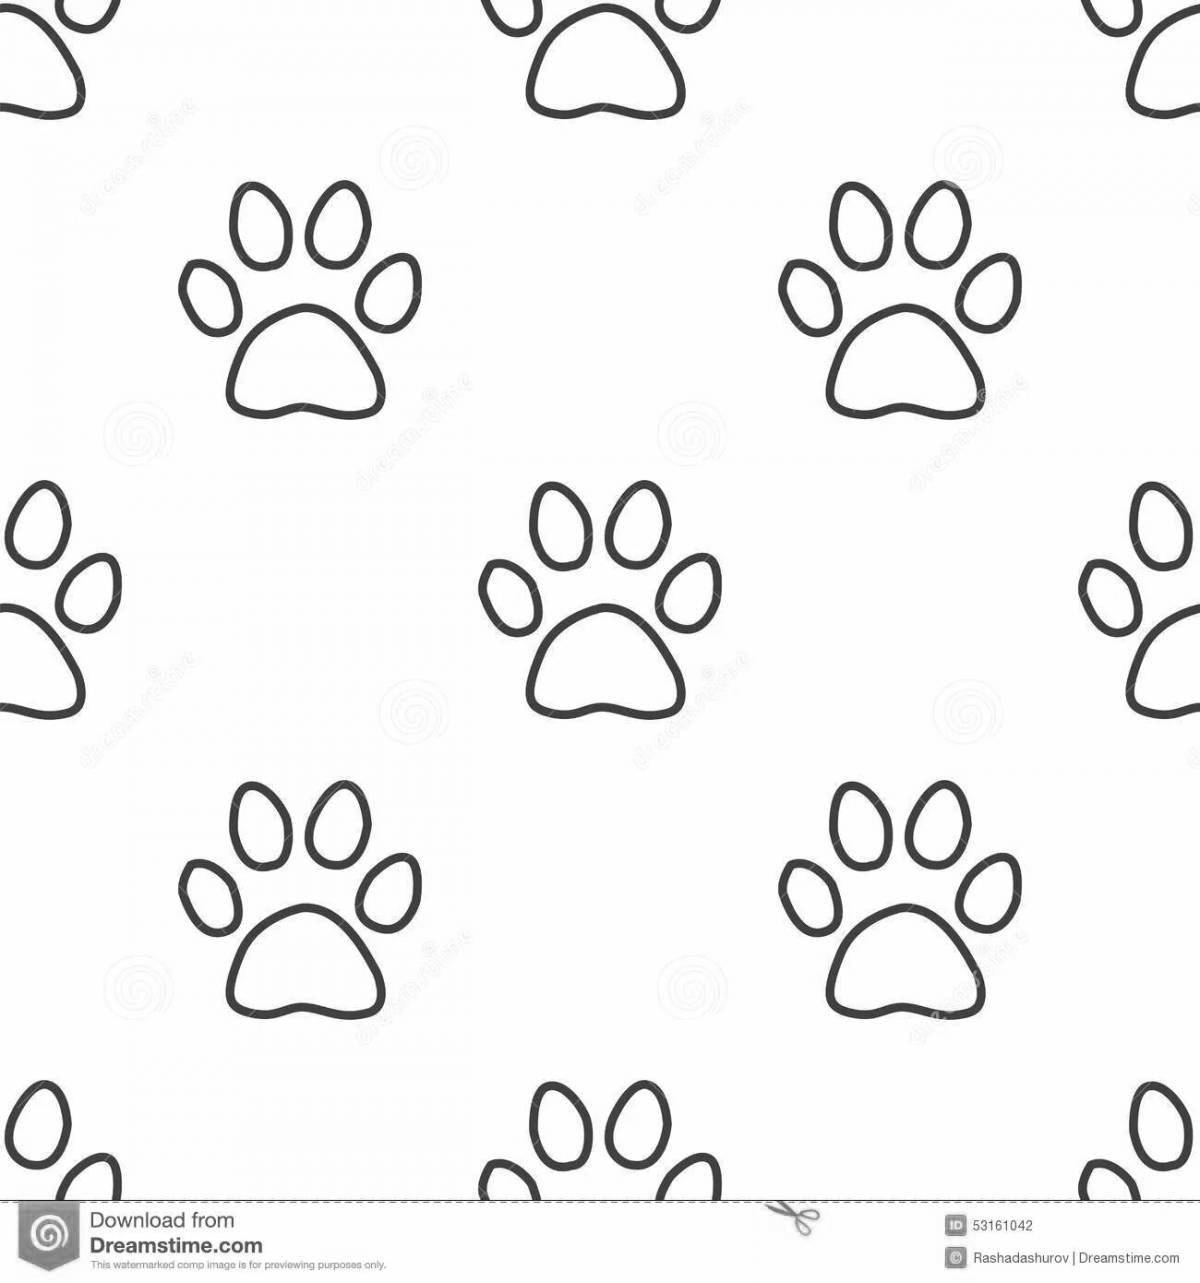 Awesome cat paw coloring page